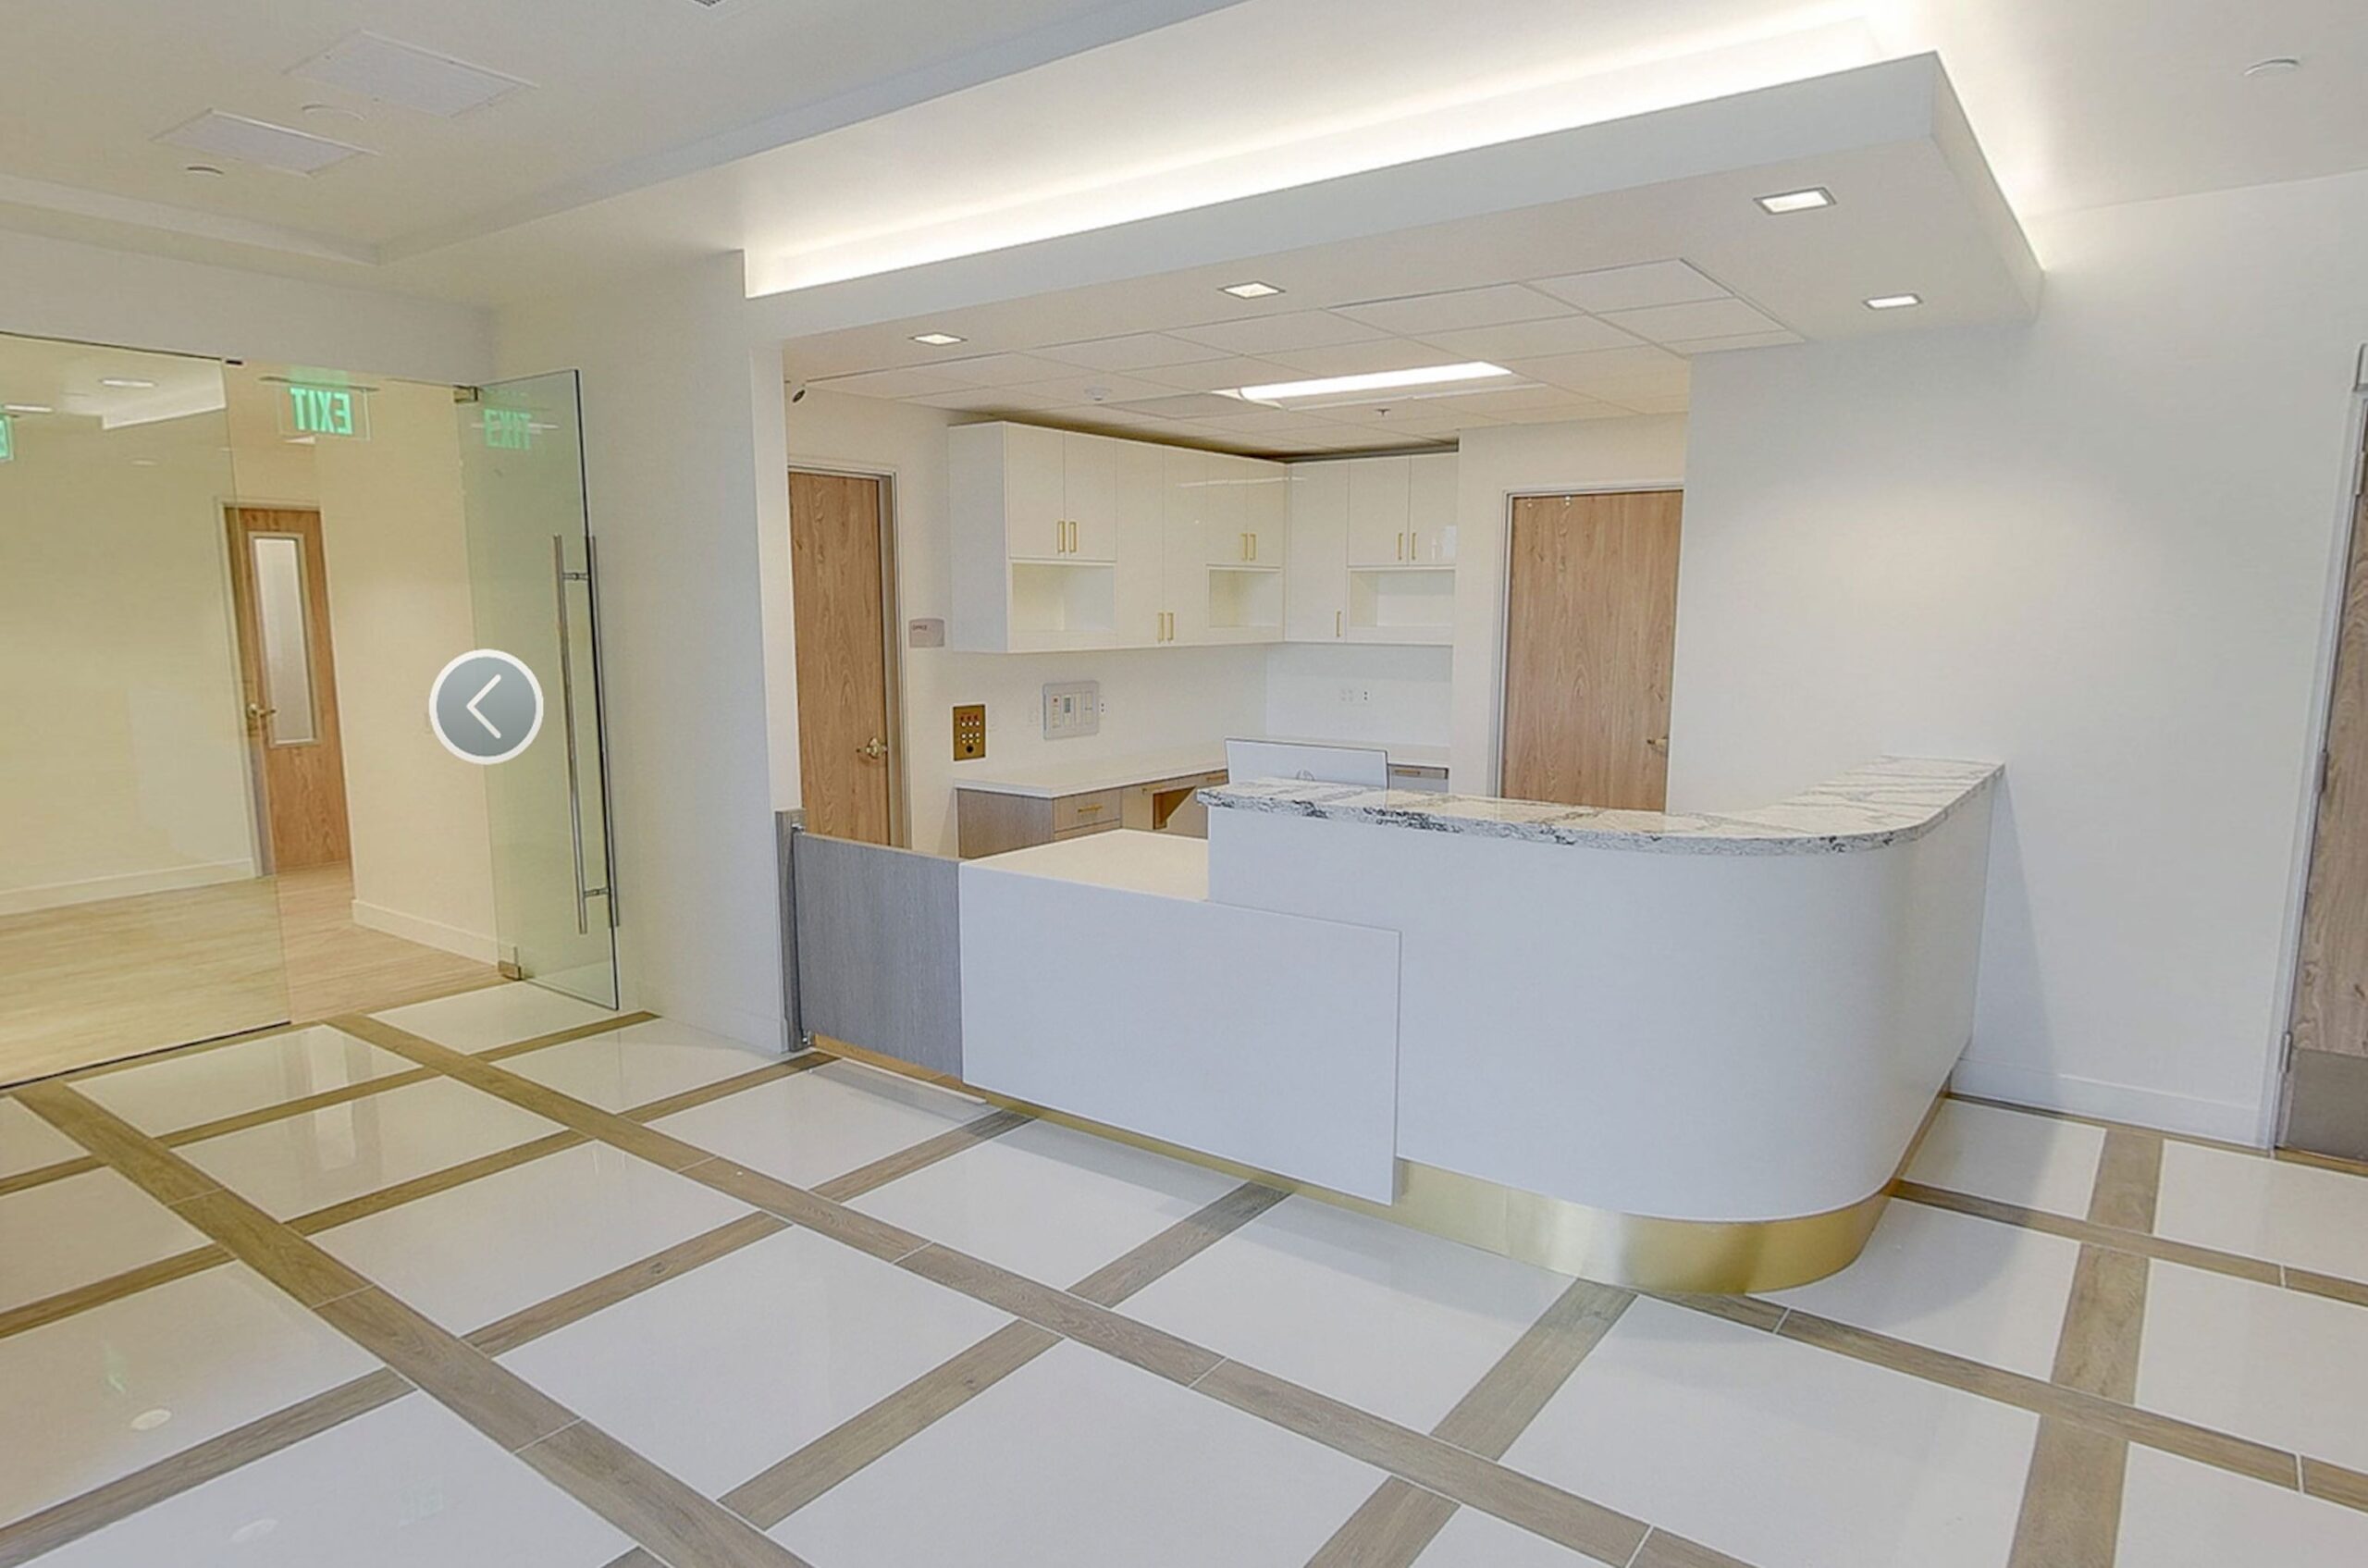 360 Virtual Tours For Medical Buildings